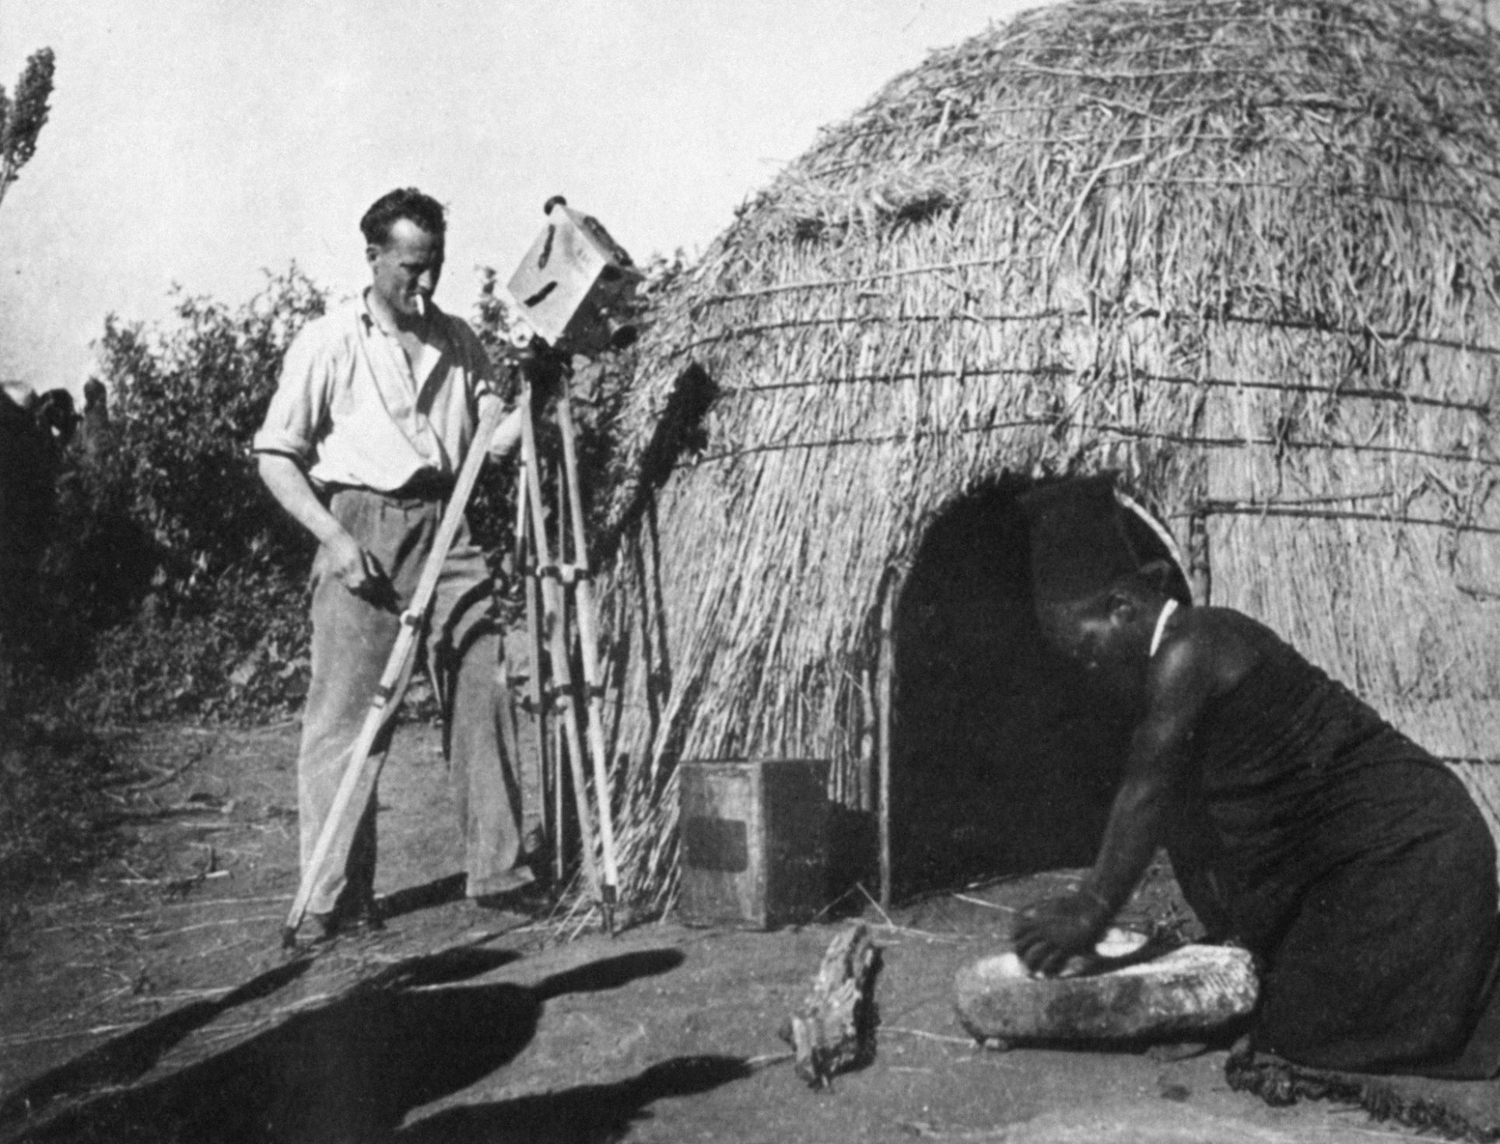 A man films a woman making food outside her straw hut